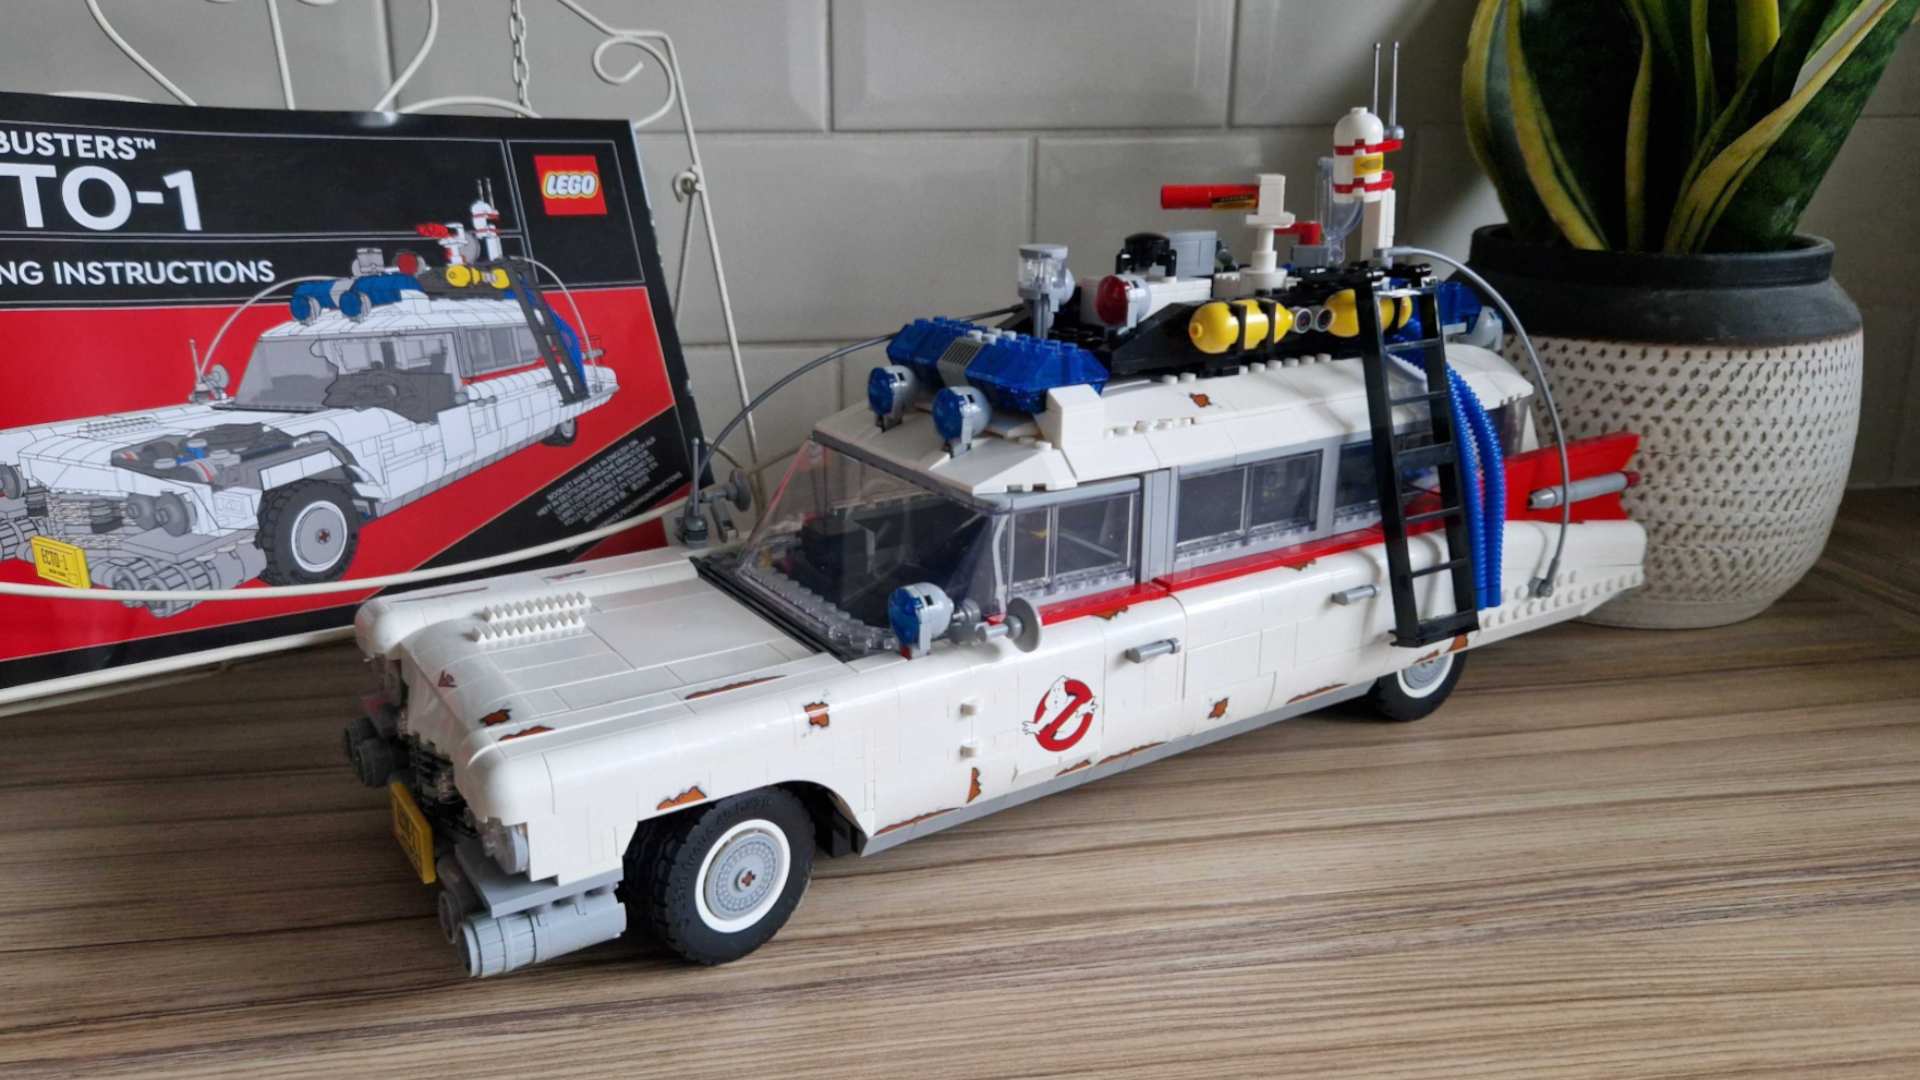 Lego Ghostbusters Ecto 1 Instructions